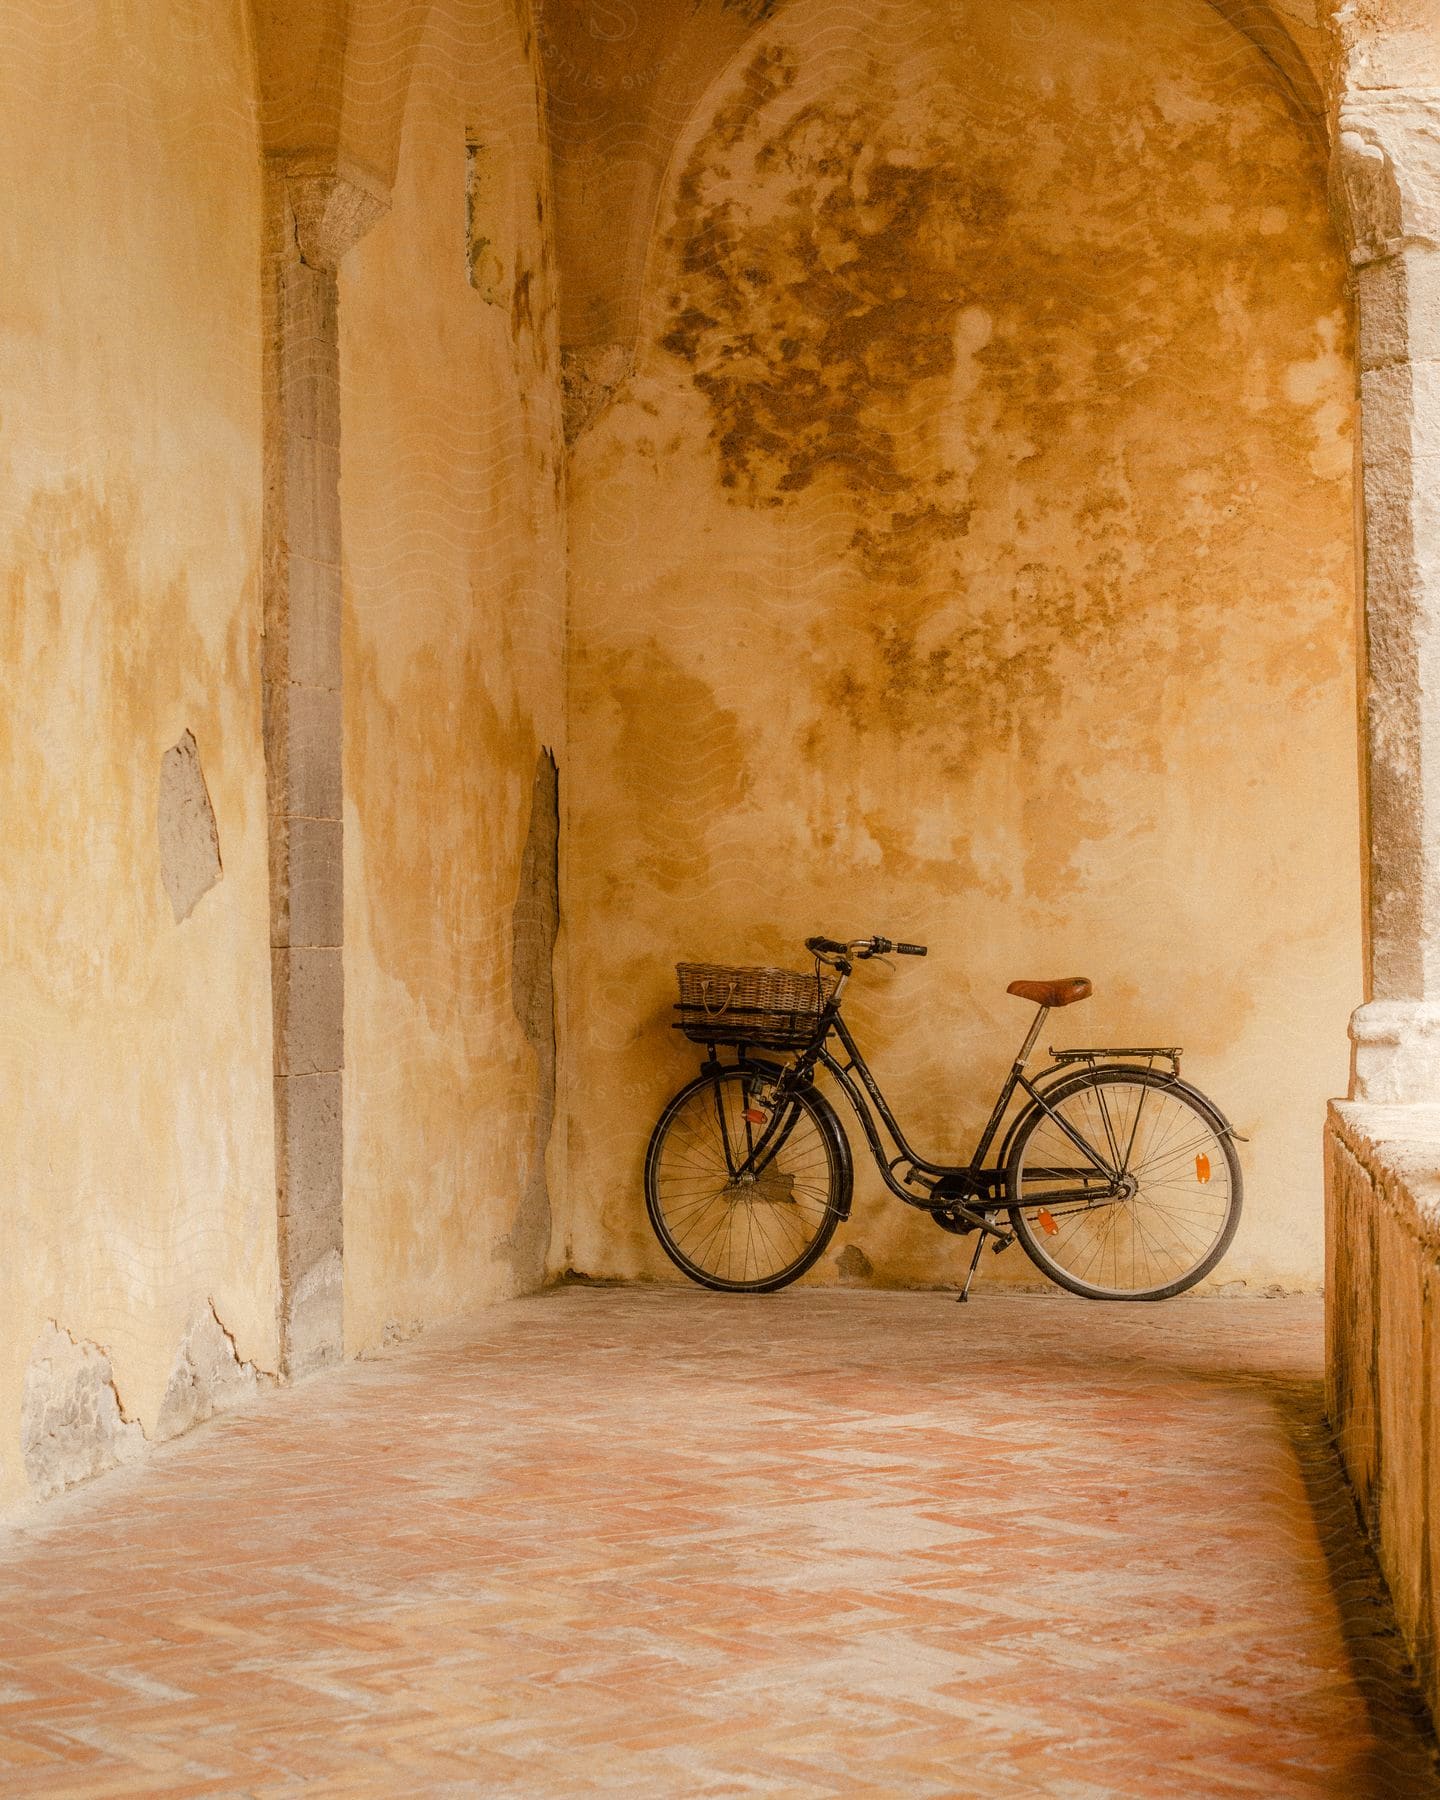 Bicycle with basket parked in an arched hallway with worn walls and tiled floor.